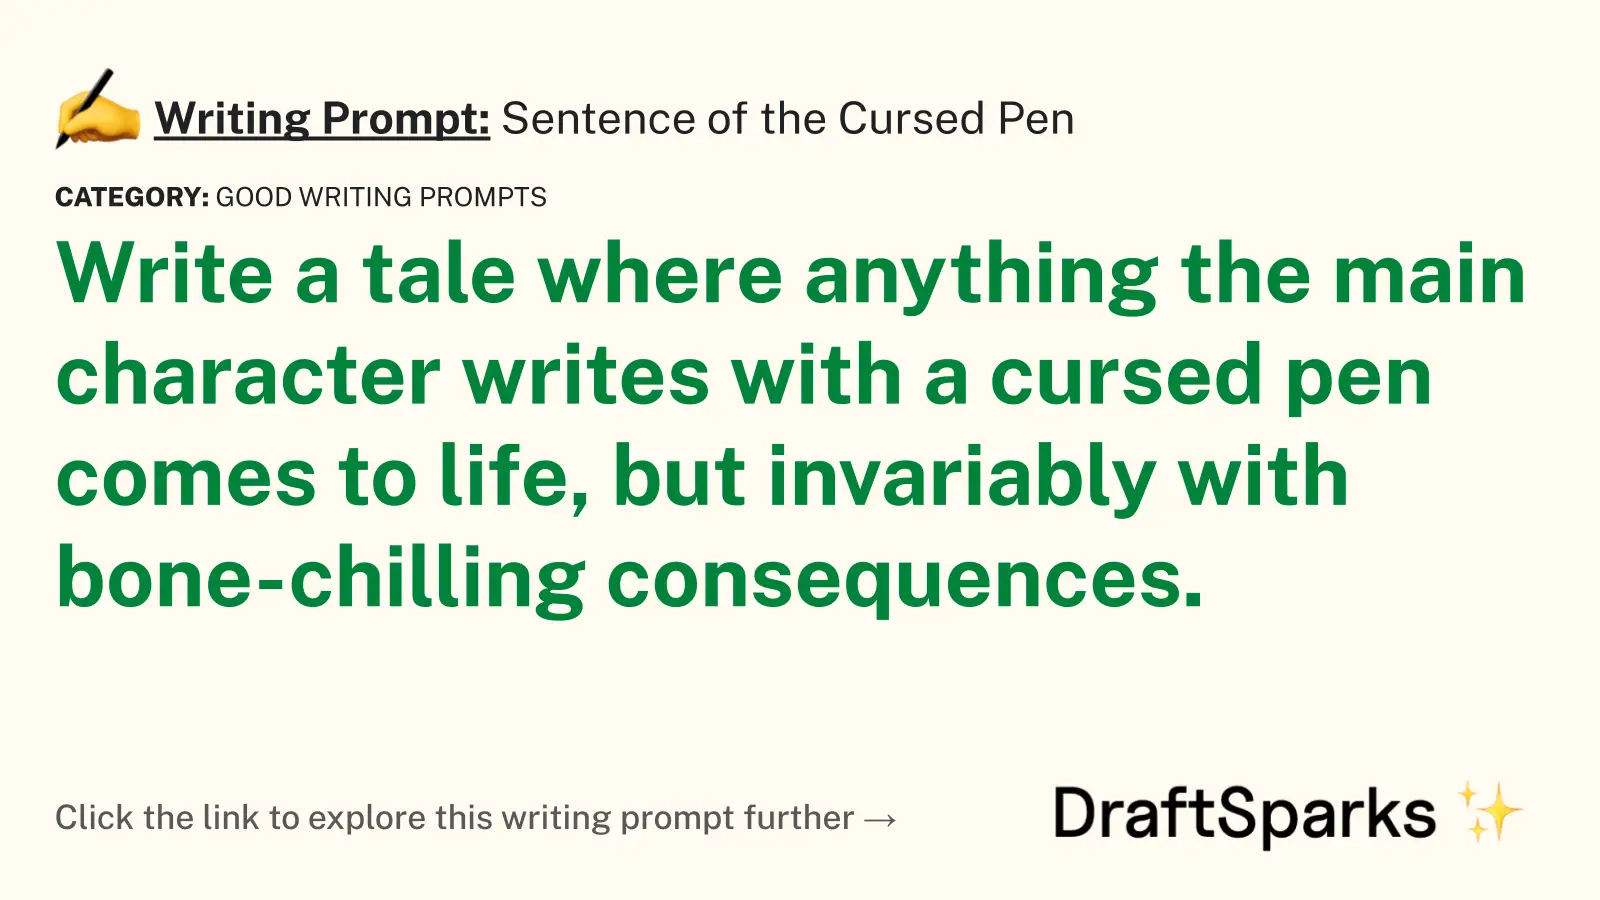 Sentence of the Cursed Pen